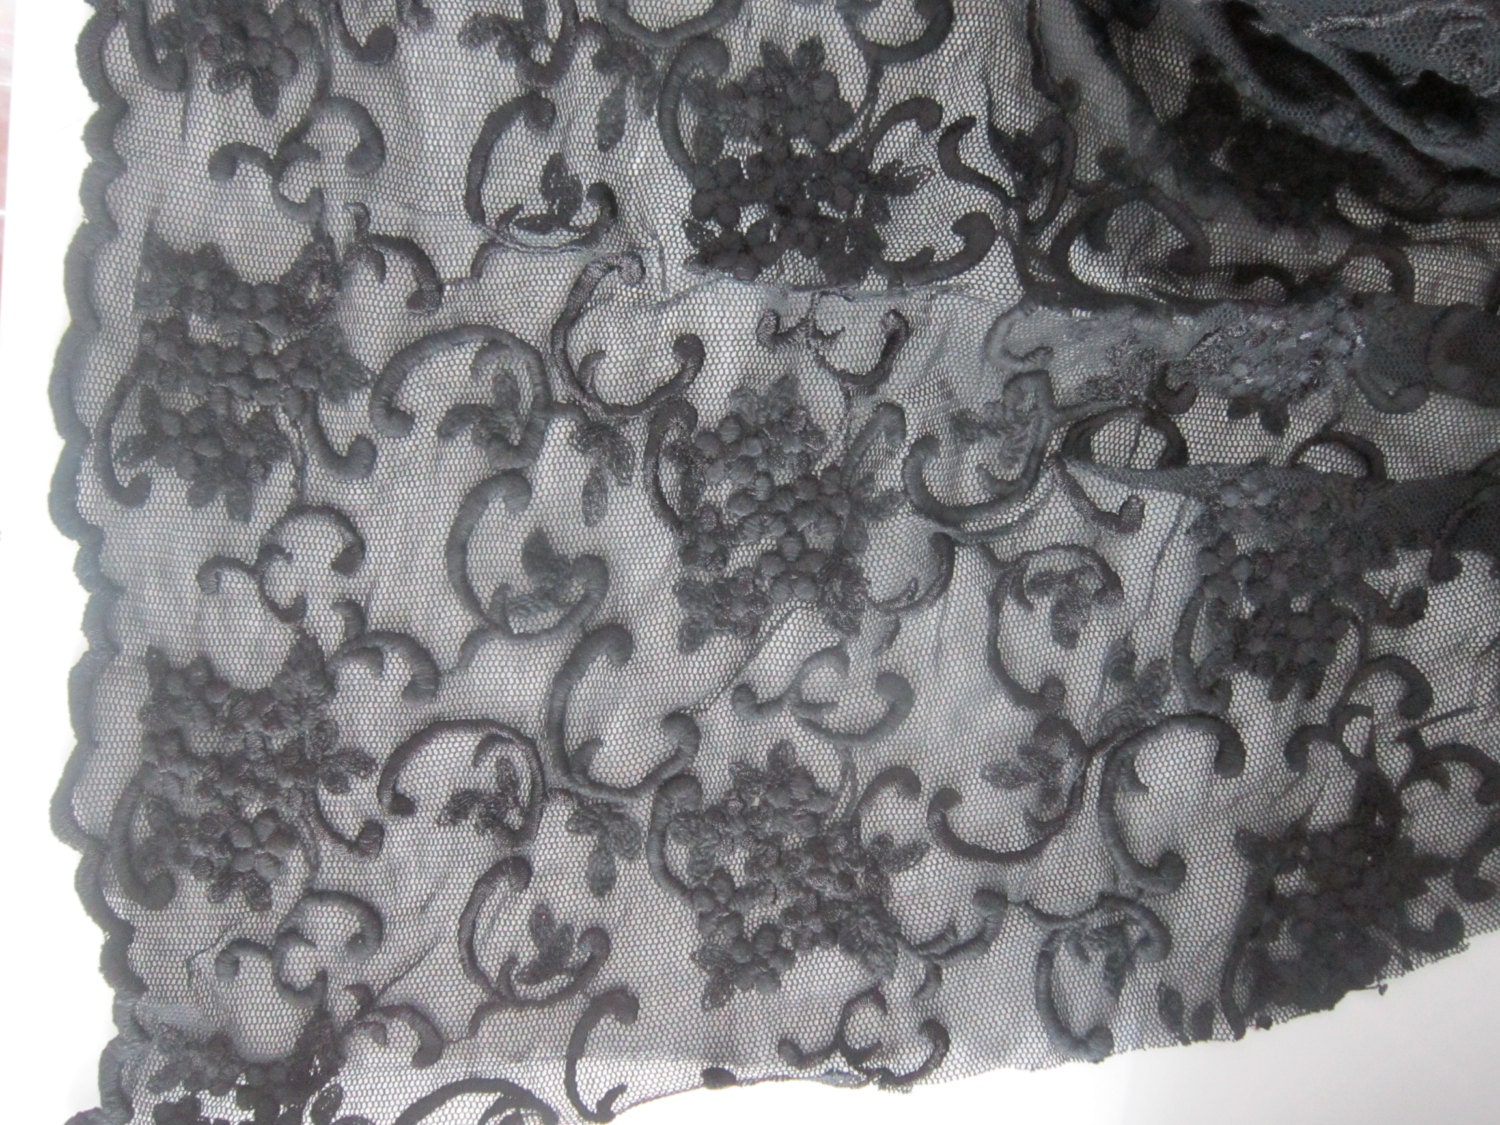 Black Lace Fabric by the Yard Black Sheer Net Lace Cotton